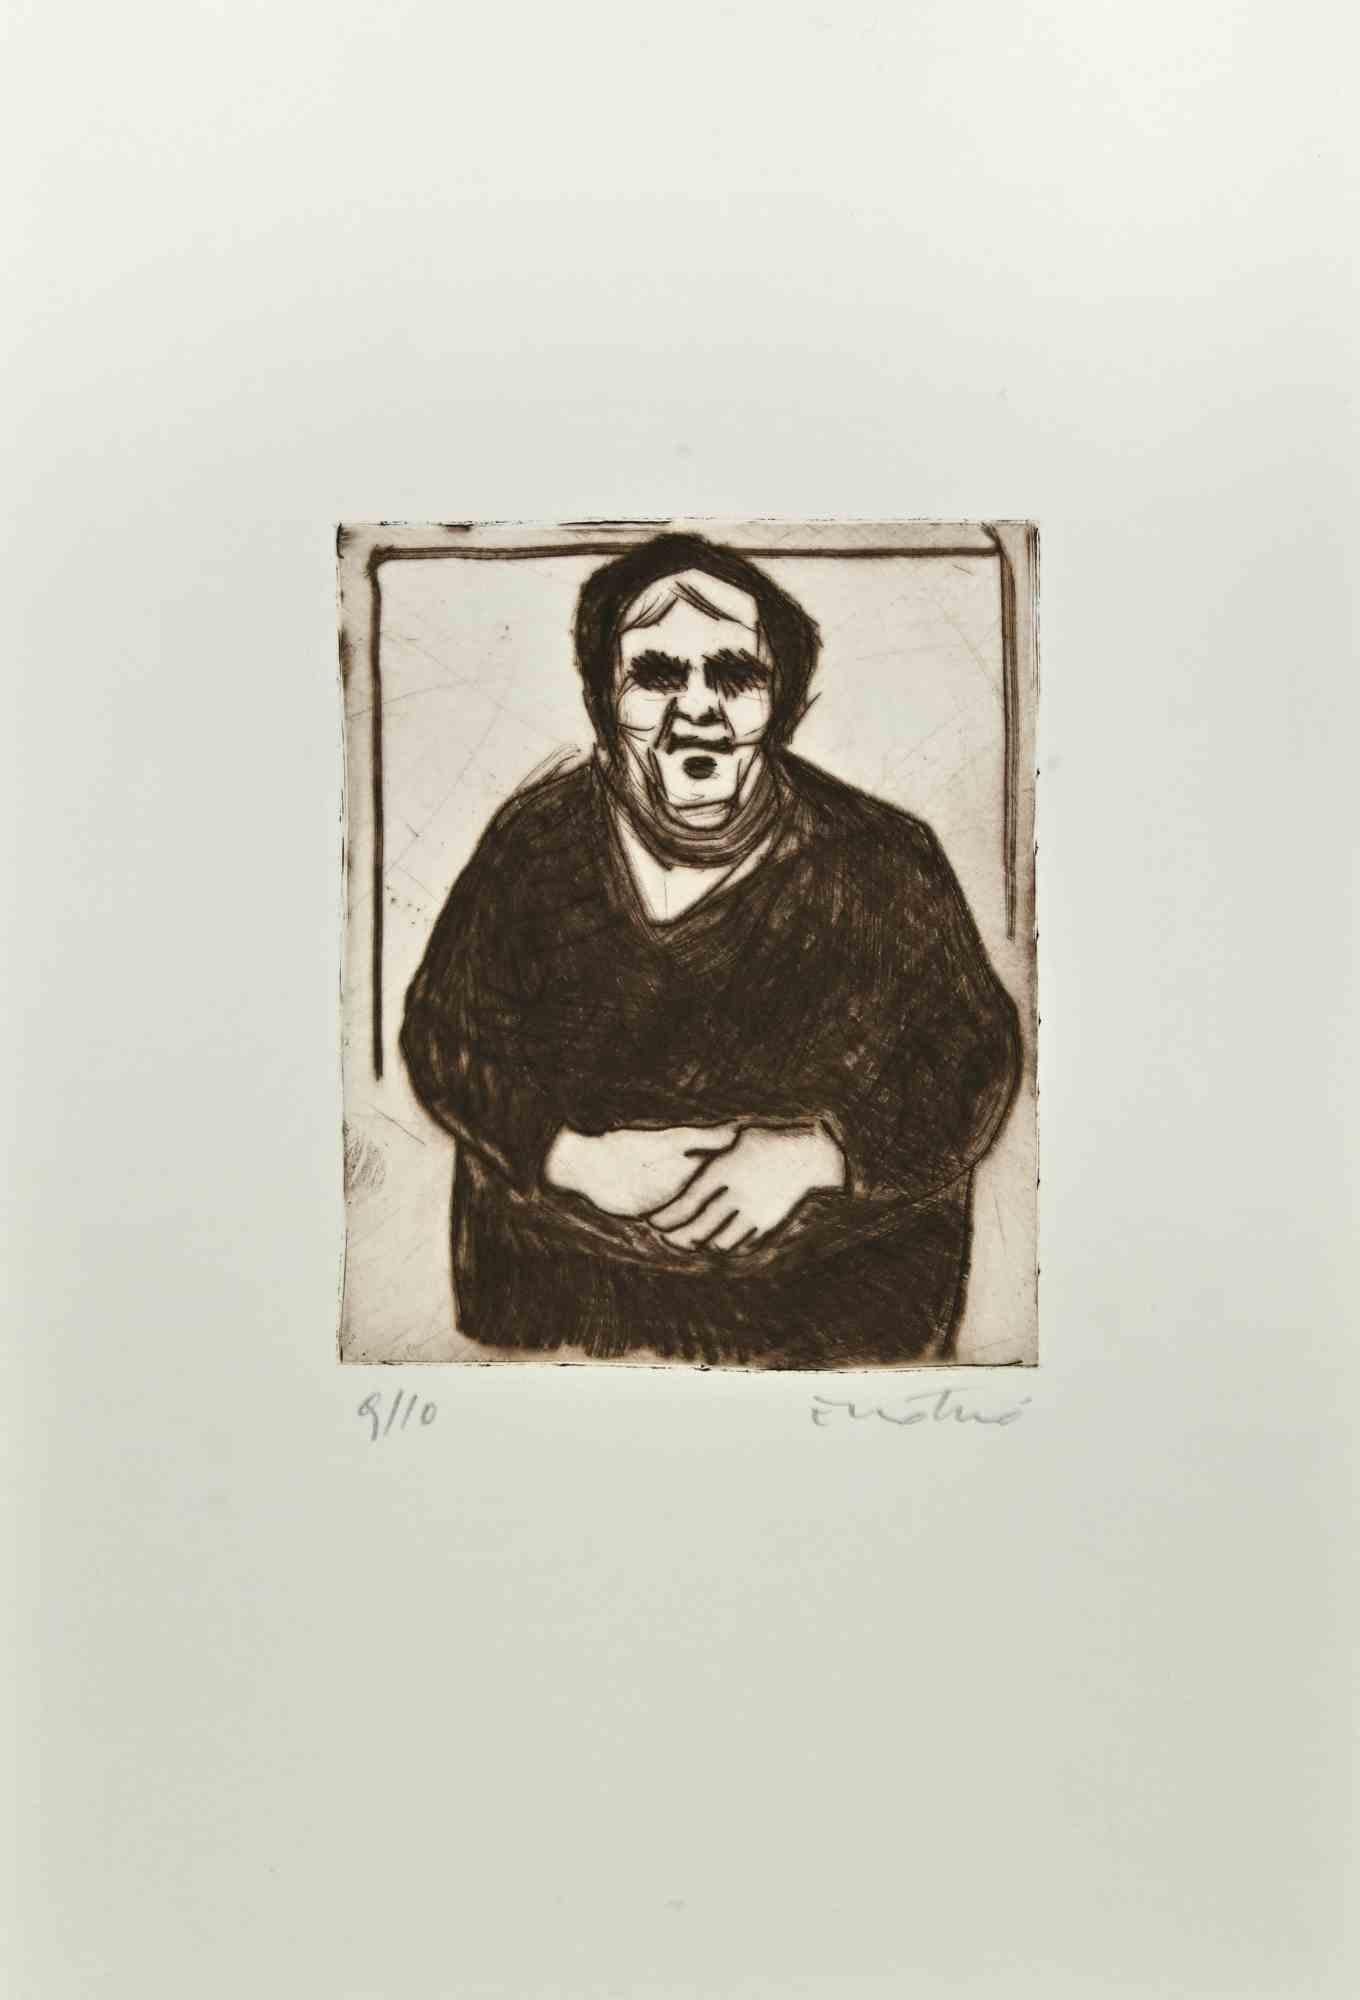 Woman of Calabria is an Etching realized by Enotrio Pugliese in 1963.

Limited edition of 10 copies numbered and signed by the artist.

Good condition on a white cardboard.

Enotrio Pugliese (May 11, 1920 - August 1989) was an Italian painter. Born